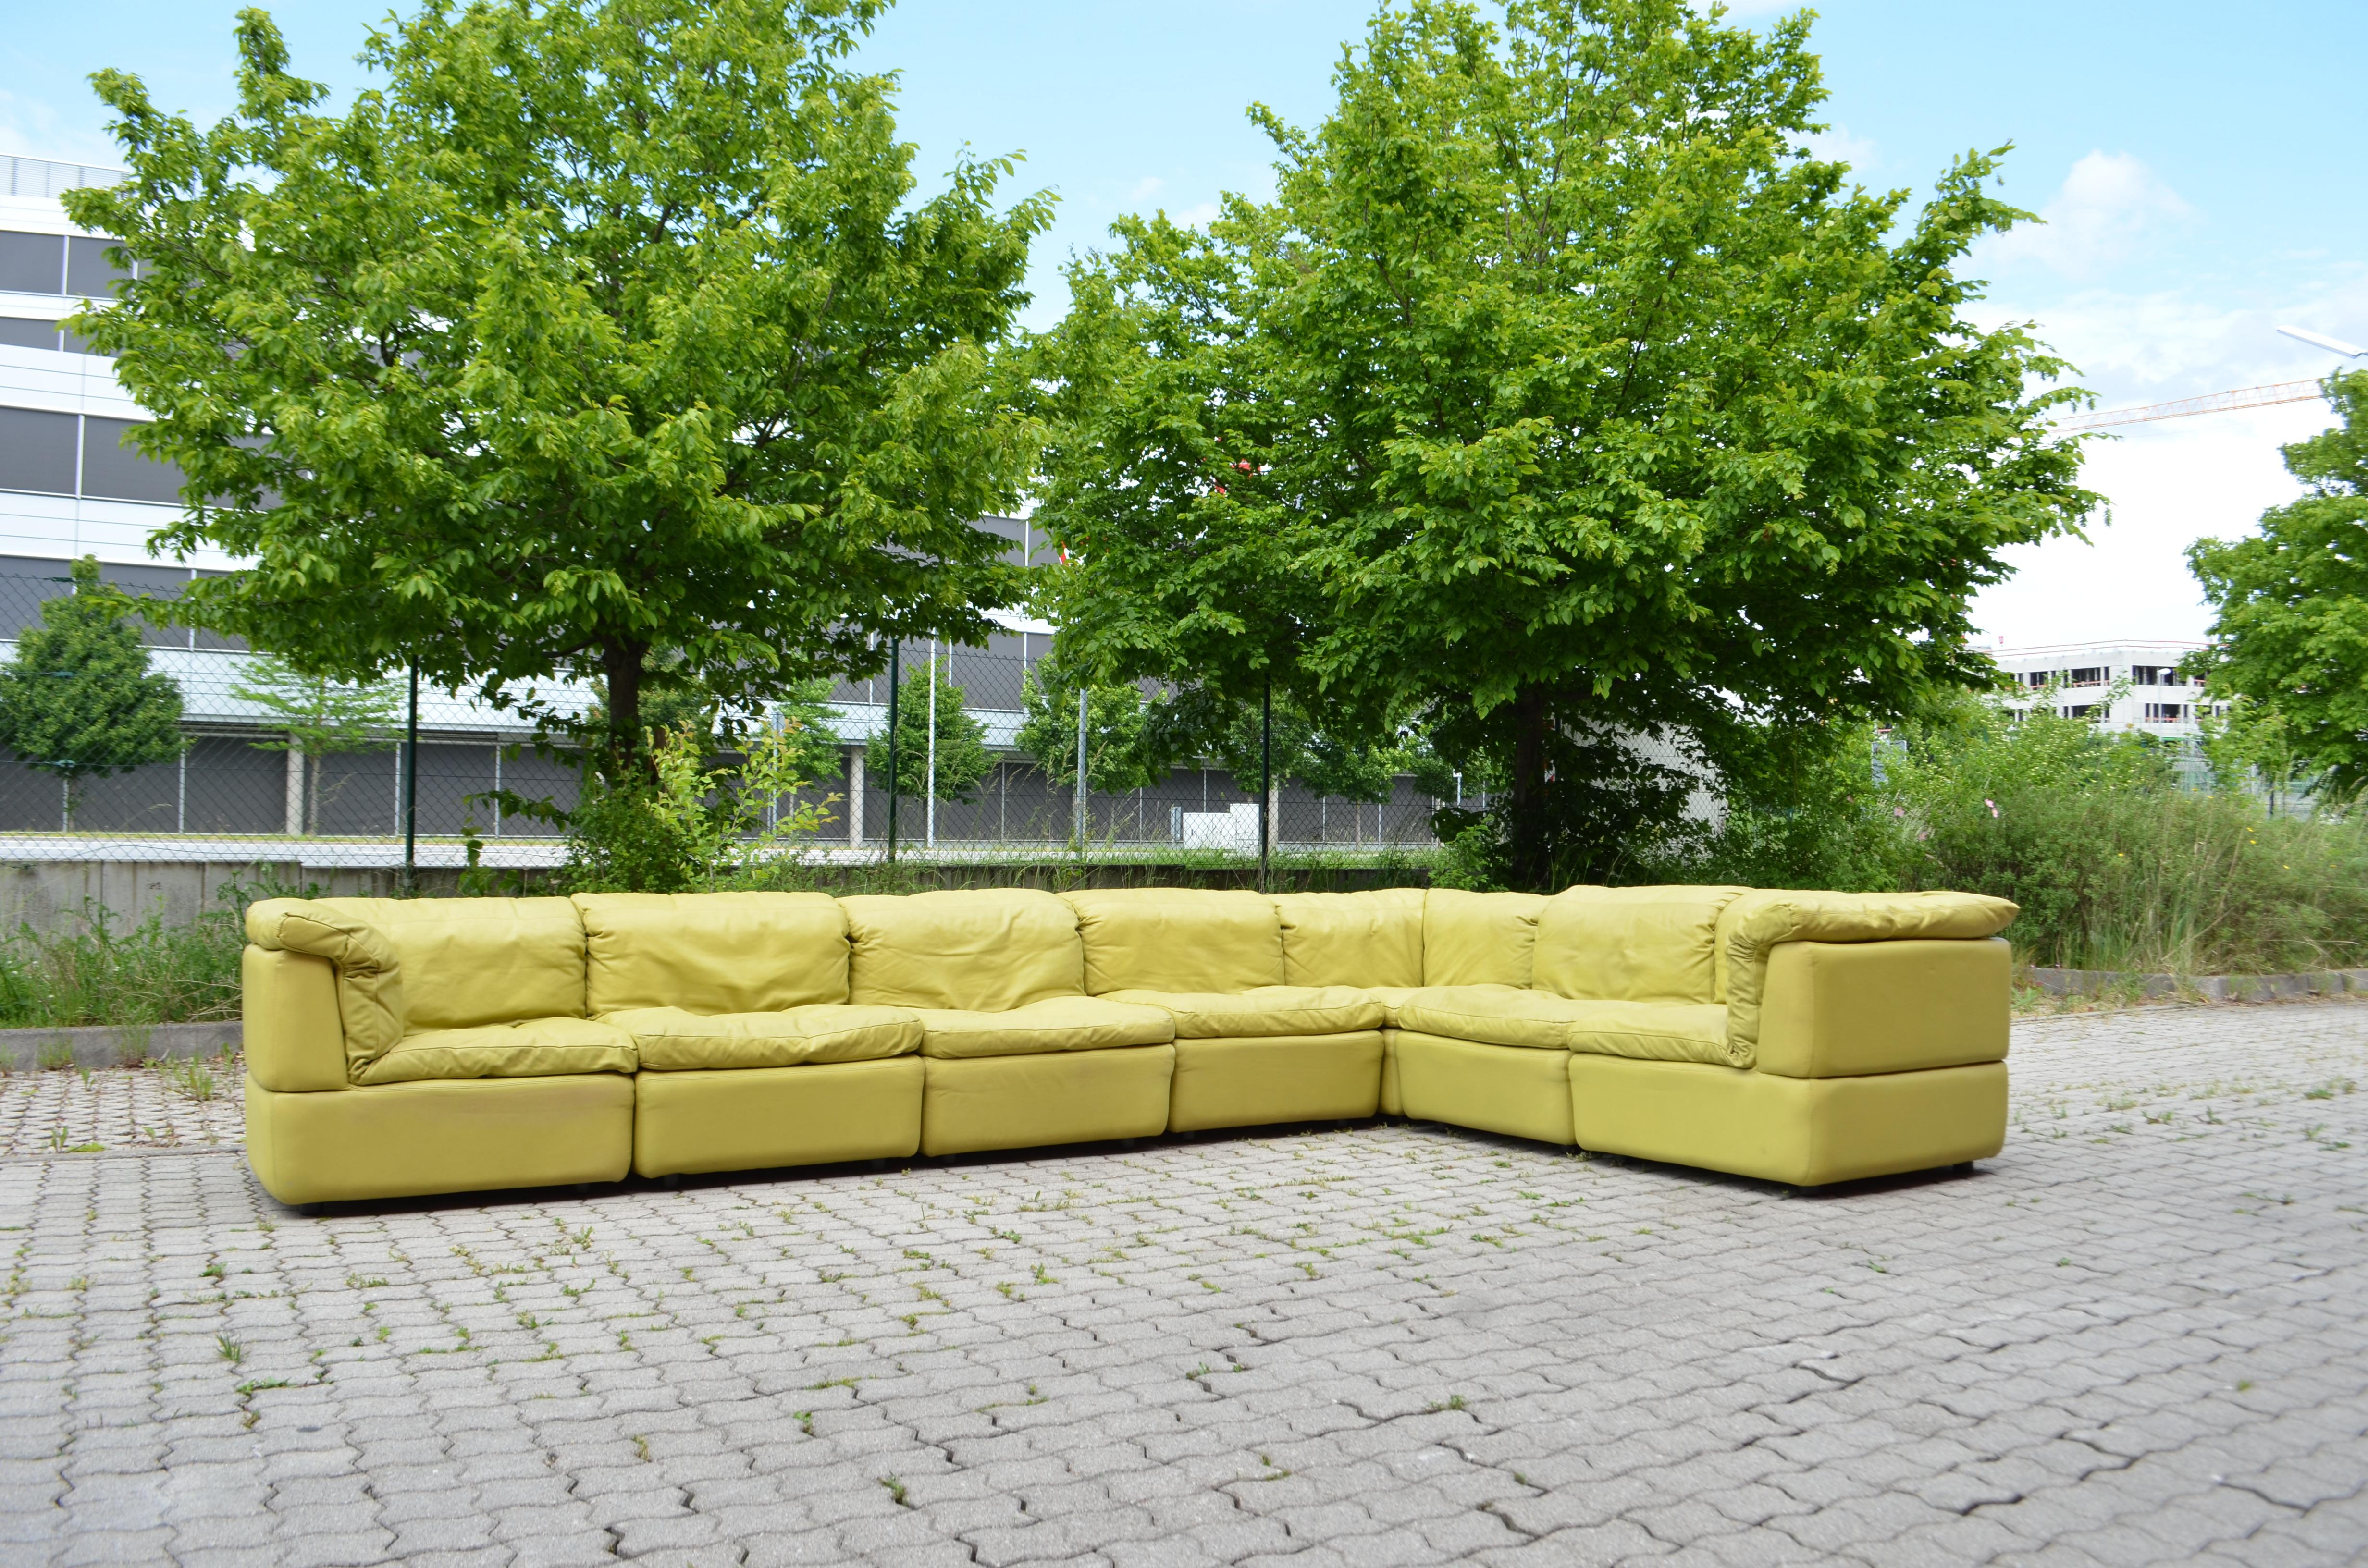 This stunning Modular sectional Rolf Benz leather sofa was manufactured in Germany.
It is a pure 70ties design with timeless modern shape.
The leather is a pure aniline pistacchio / limegreen color with a great soft leather touch.
This colour is